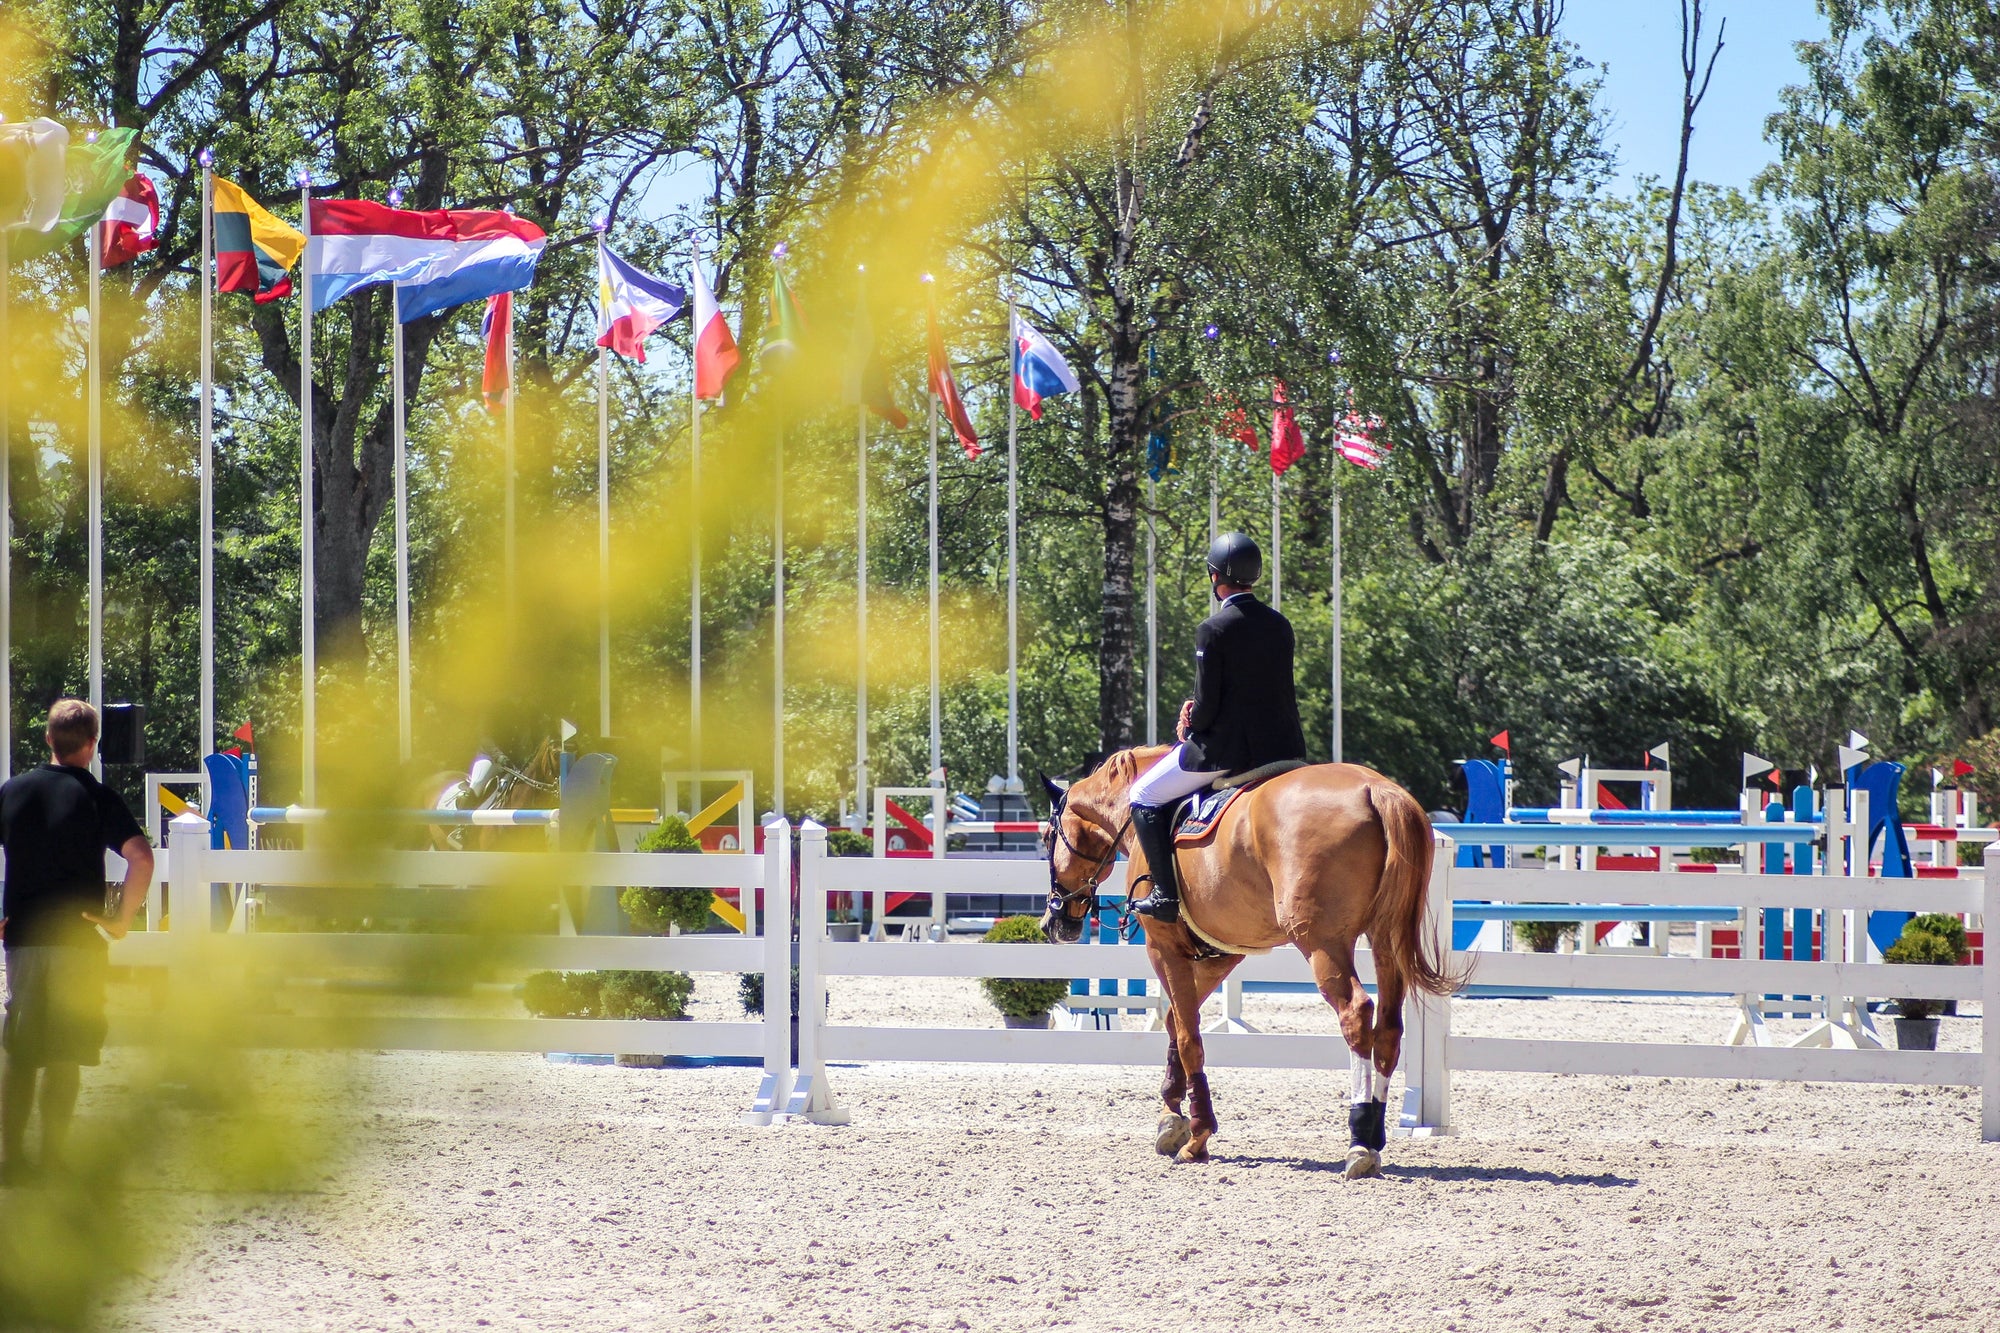 Man riding horse at competition with flags in the background